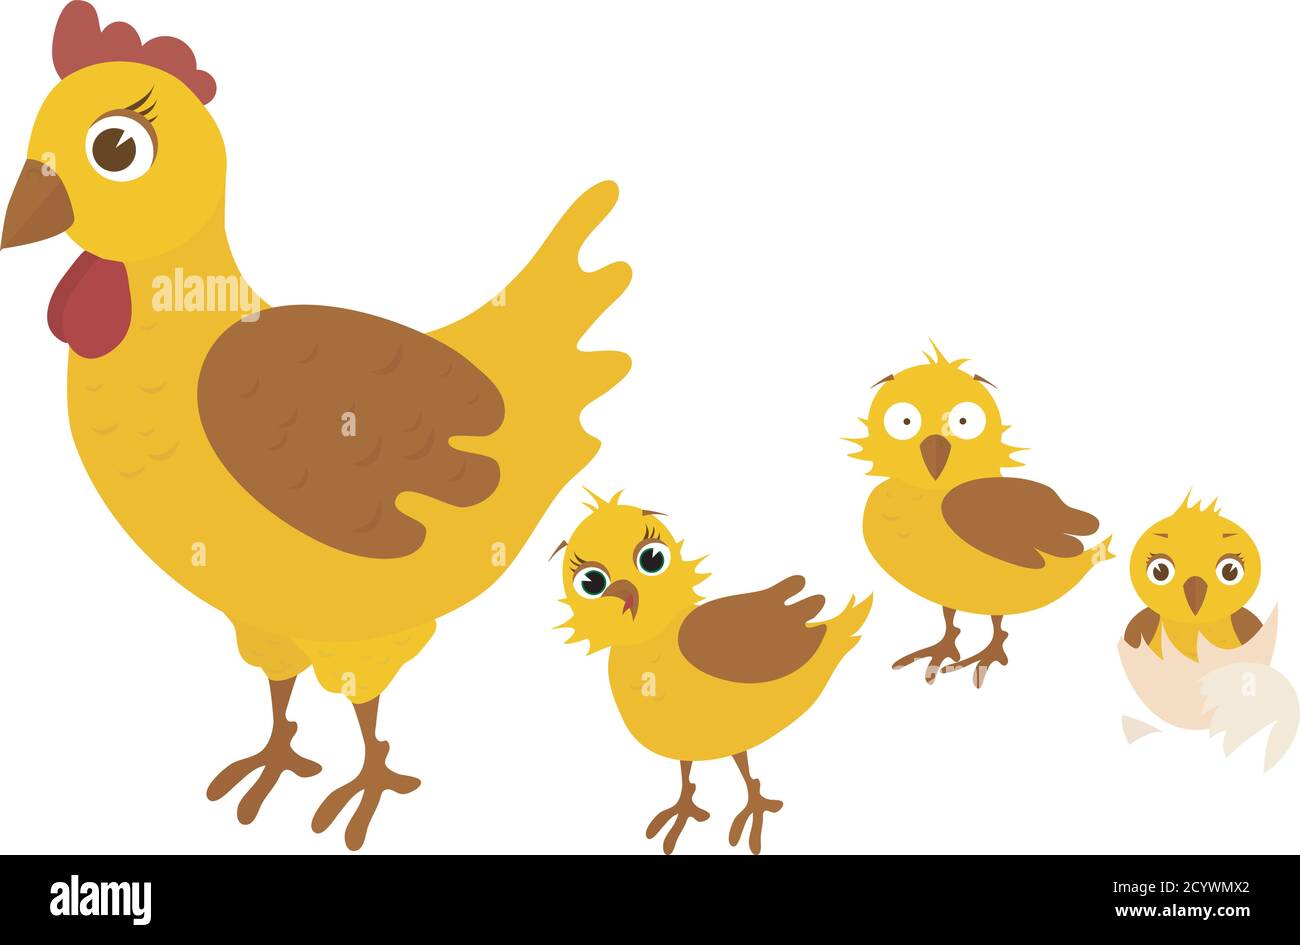 https://c8.alamy.com/comp/2CYWMX2/chicken-family-mother-takes-her-three-yellow-chickens-2CYWMX2.jpg